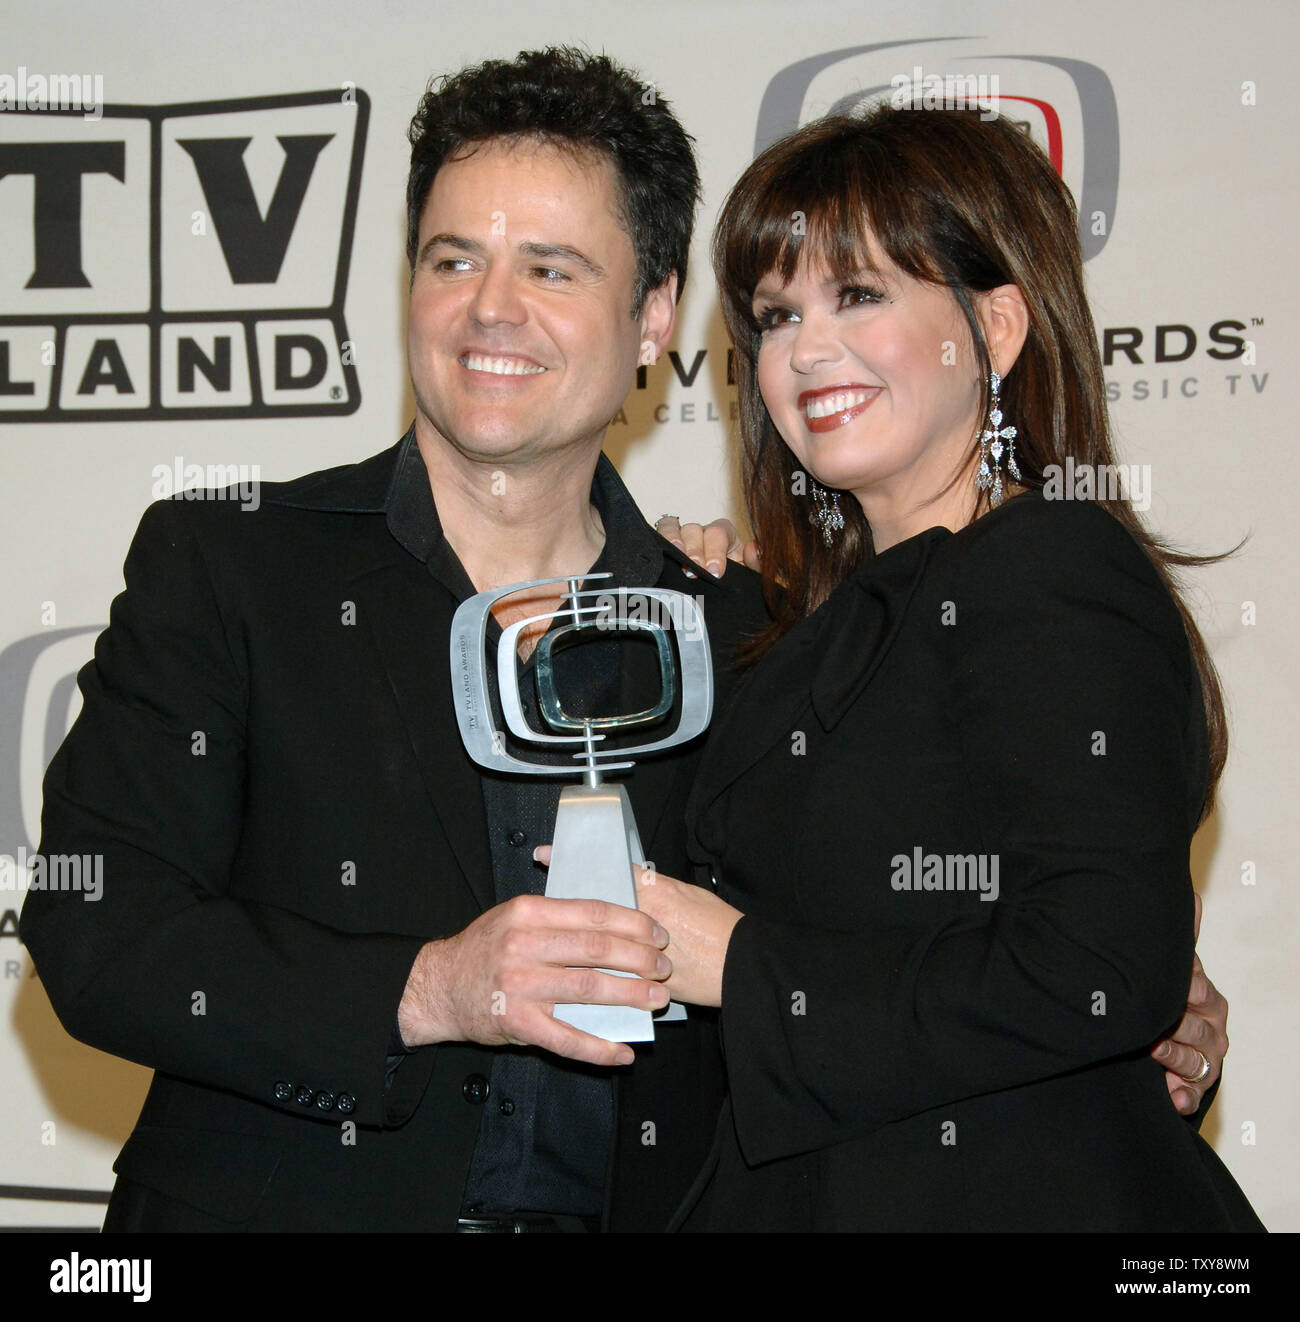 Marie Osmond (R) and her brother Donny Osmond appear backstage during a taping of the fourth annual TV Land Awards show on March 19, 2006 in Santa Monica, California. The Osmonds were honored with the favorite singing siblings award at the awards show which honors classic television performers and their shows and will be telecast on the TV Land cable channel on March 22. (UPI Photo/Jim Ruymen) Stock Photo